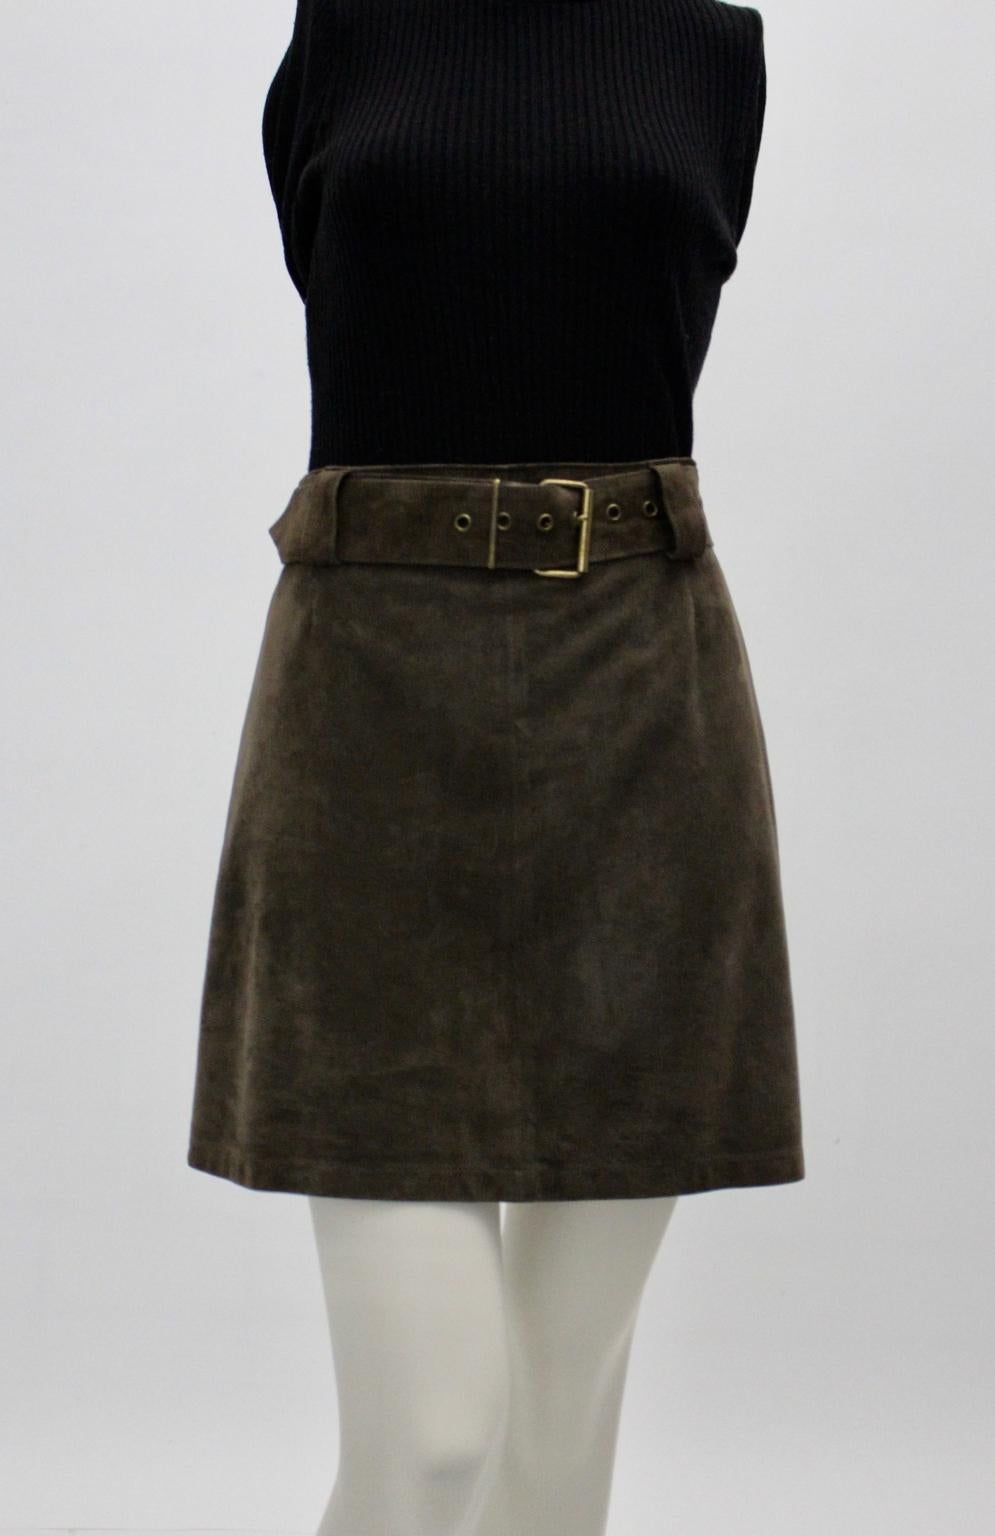 Sylvie Schimmel Paris clothings stand for high-end leather design.
This brand makes a perfect blend between femininity, elegance and the spirit of nonchalance.

The presented mini skirt was made of very soft suede leather also full lined. 
The color